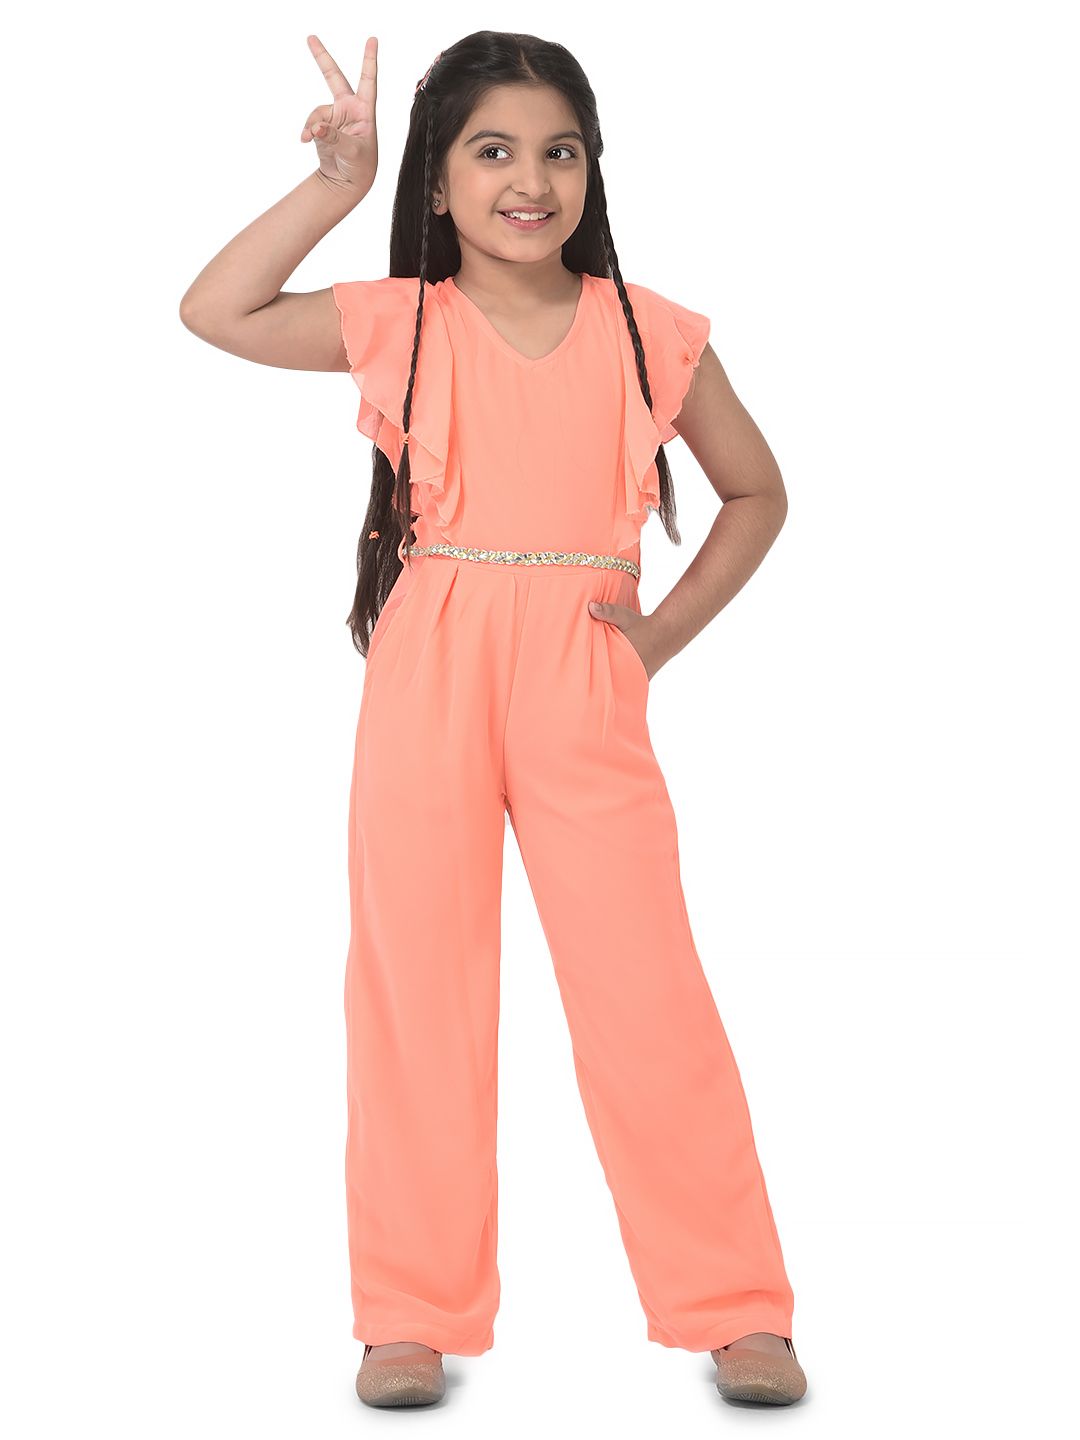 Experience 181+ jumpsuit for 13 year girl best